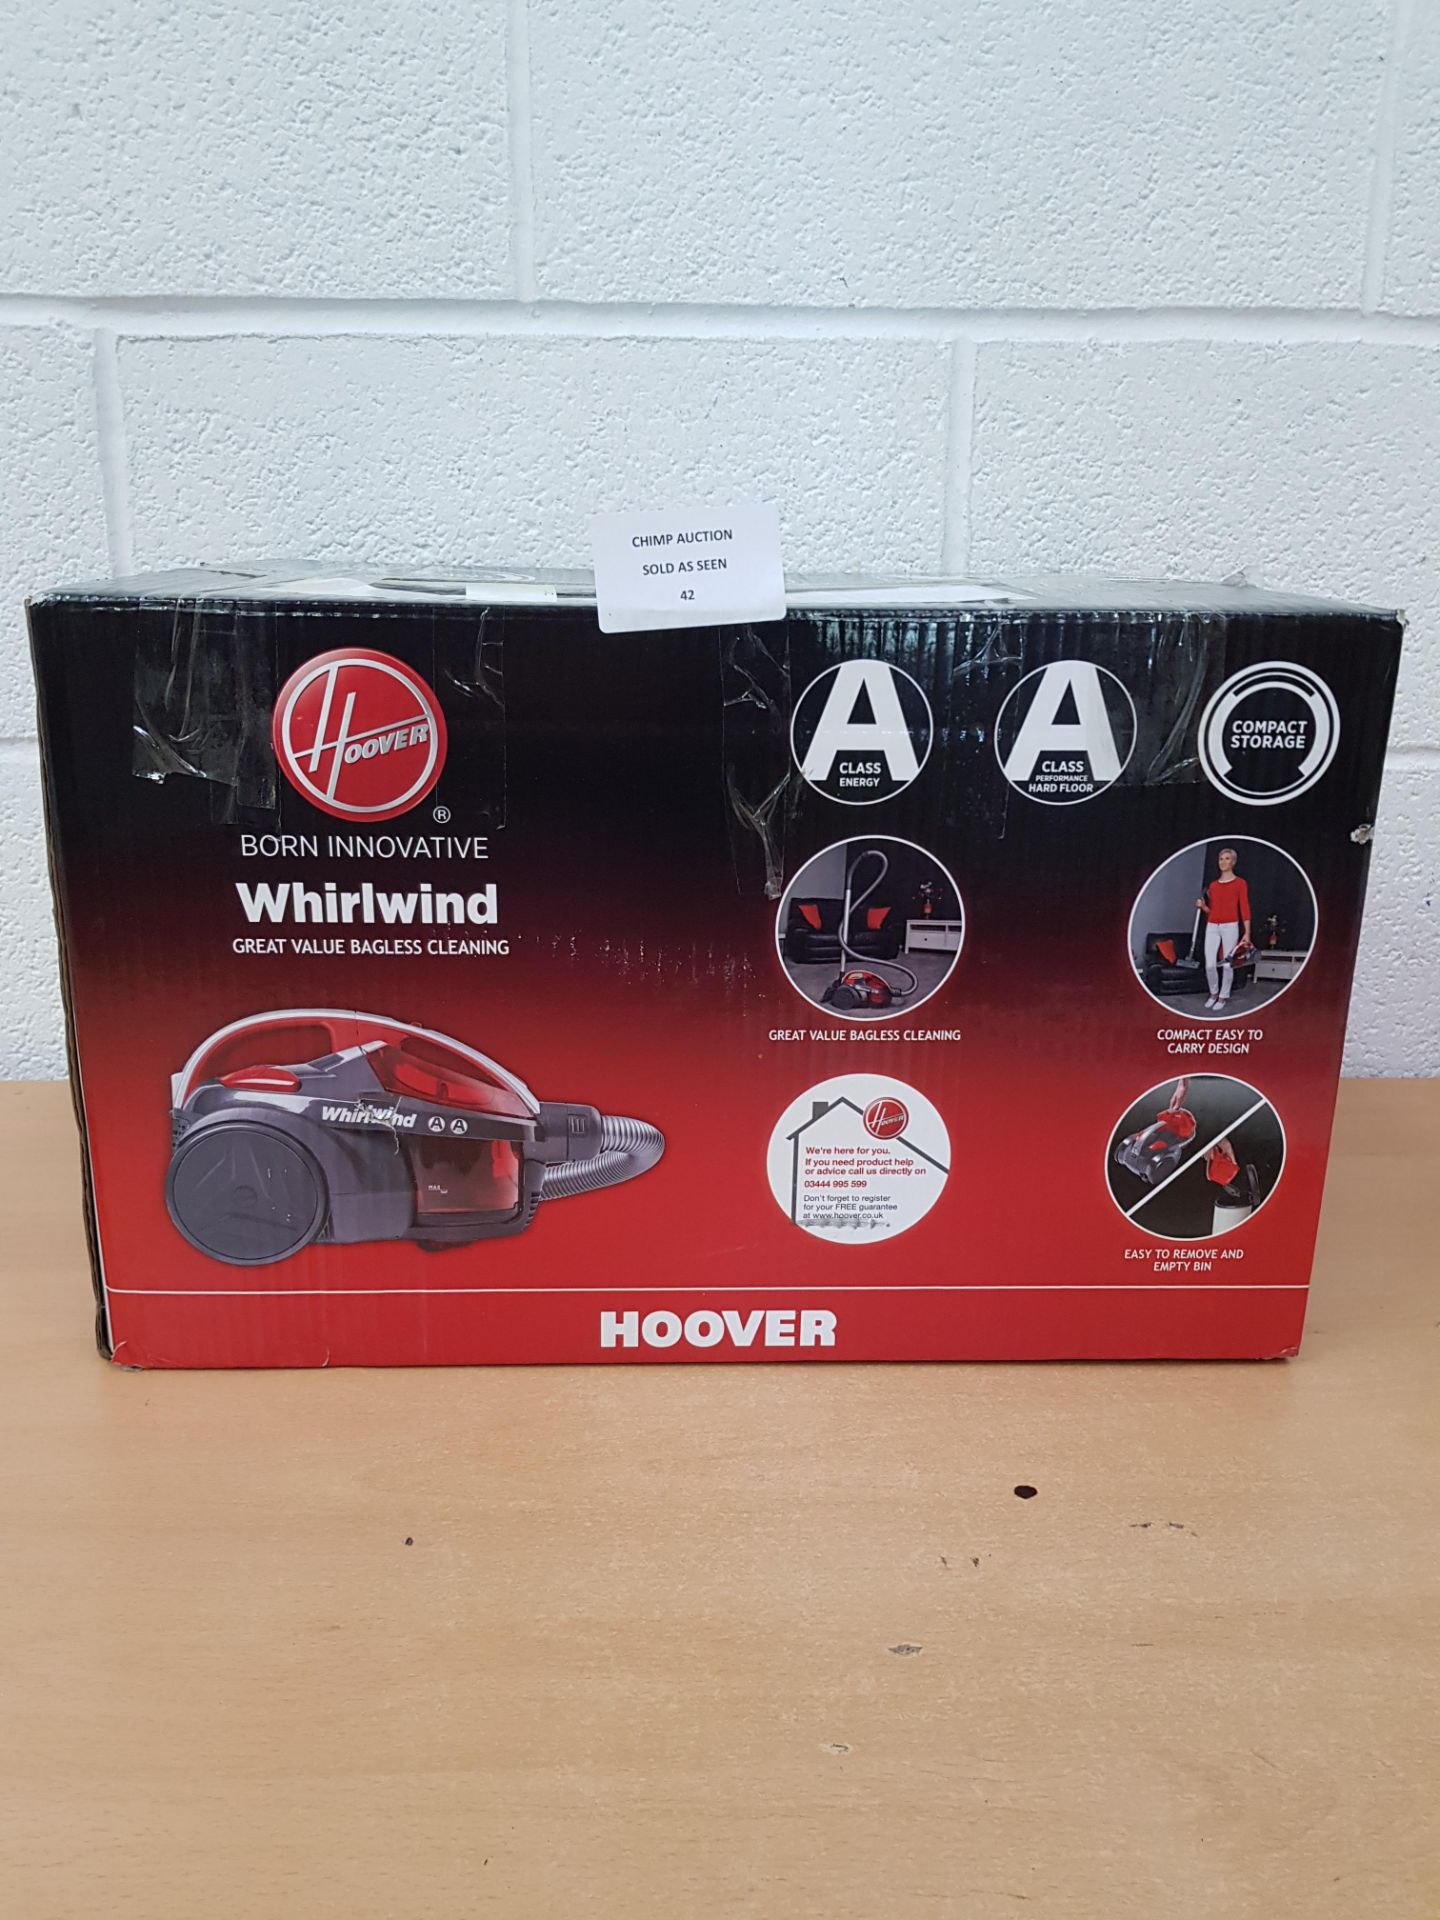 Hoover Whirlwind Bagless Cylinder Vacuum Cleaner, [SE71WR01] RRP £119.99.